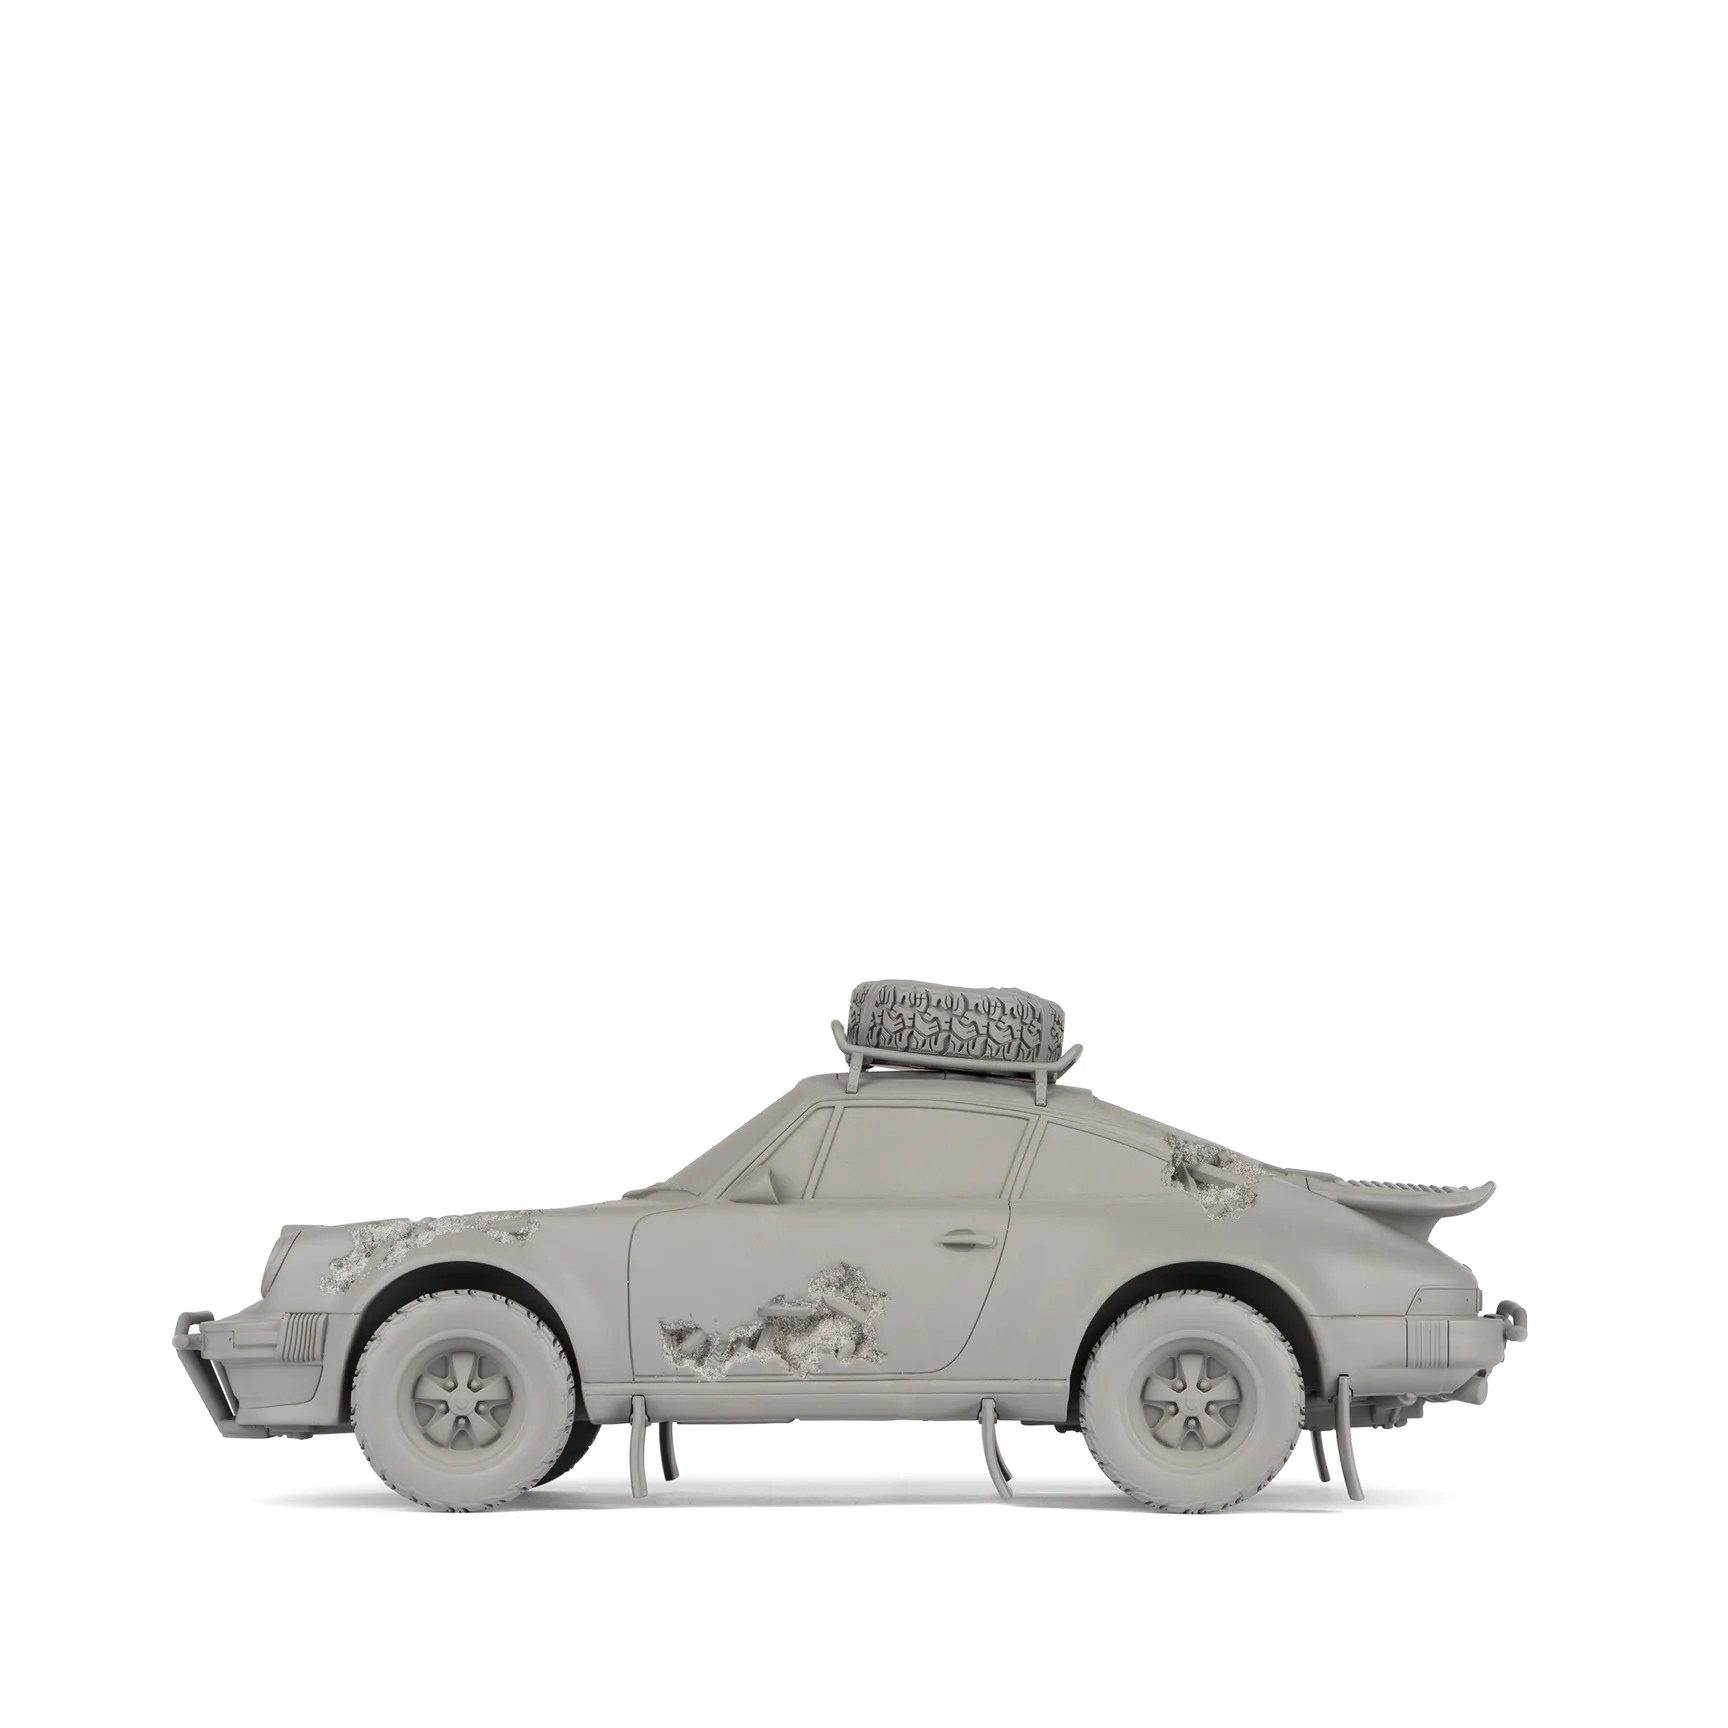 A sculpture of a grey car with eroded crystal sections.